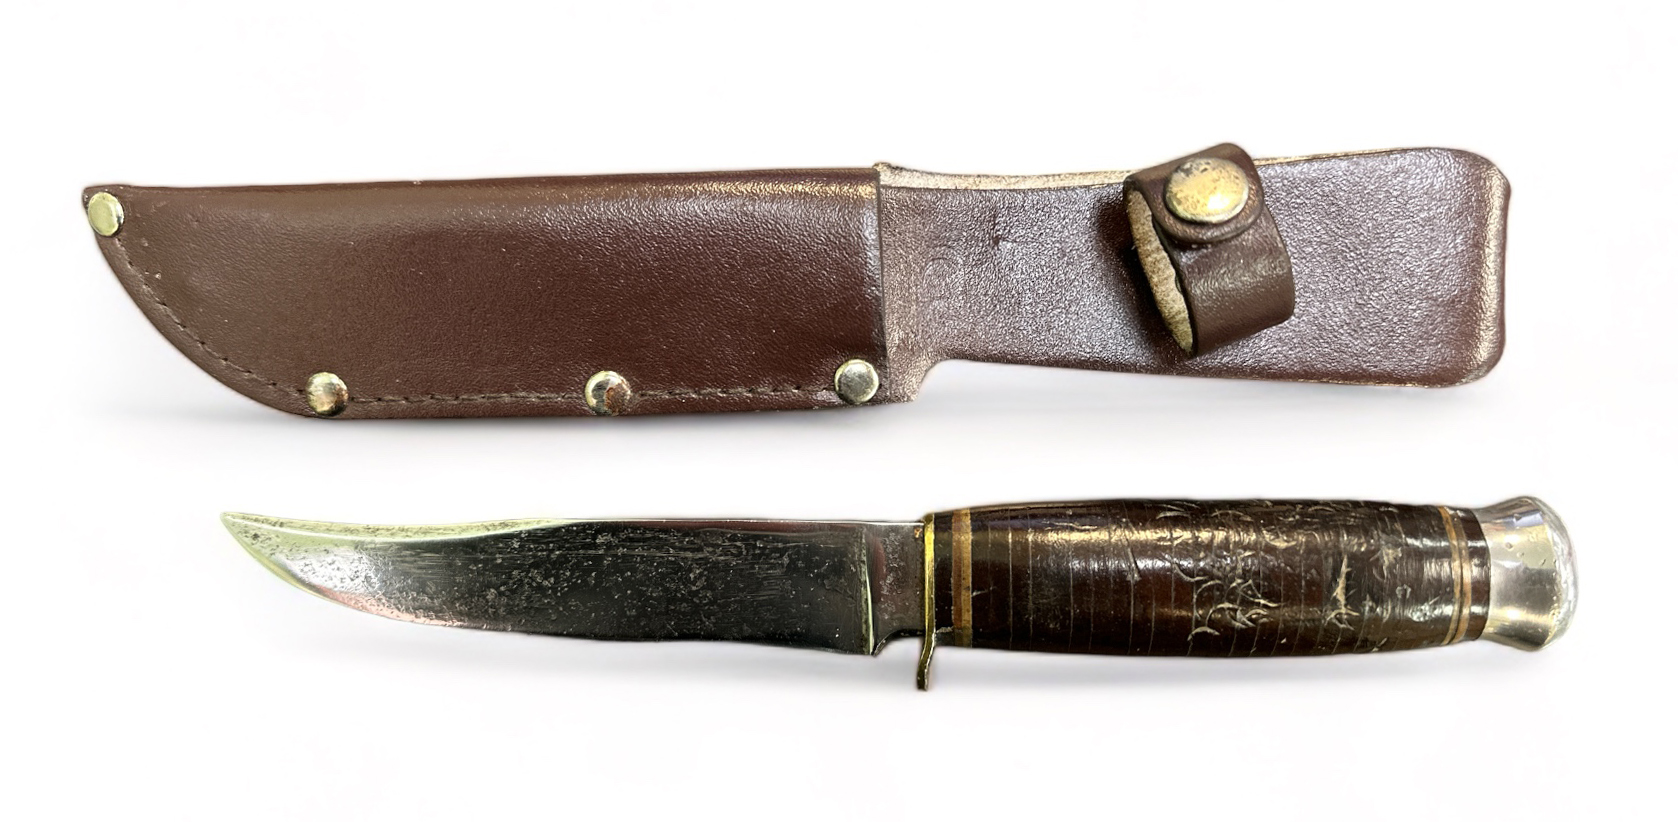 Whitby Germany sheafed Bowie knife